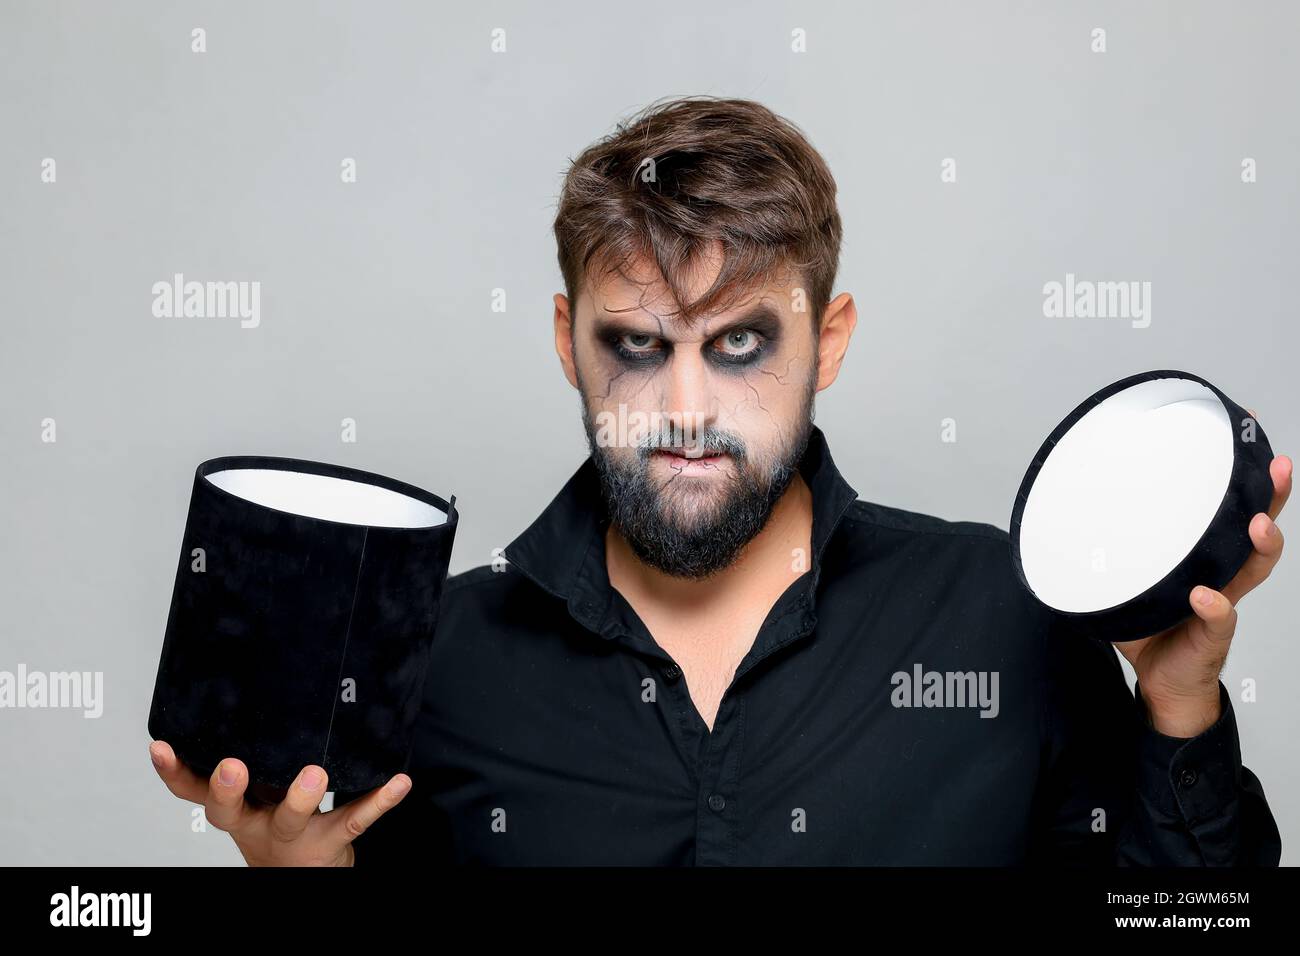 a man with a beard and makeup for Halloween holds a black box with gifts in his hands Stock Photo